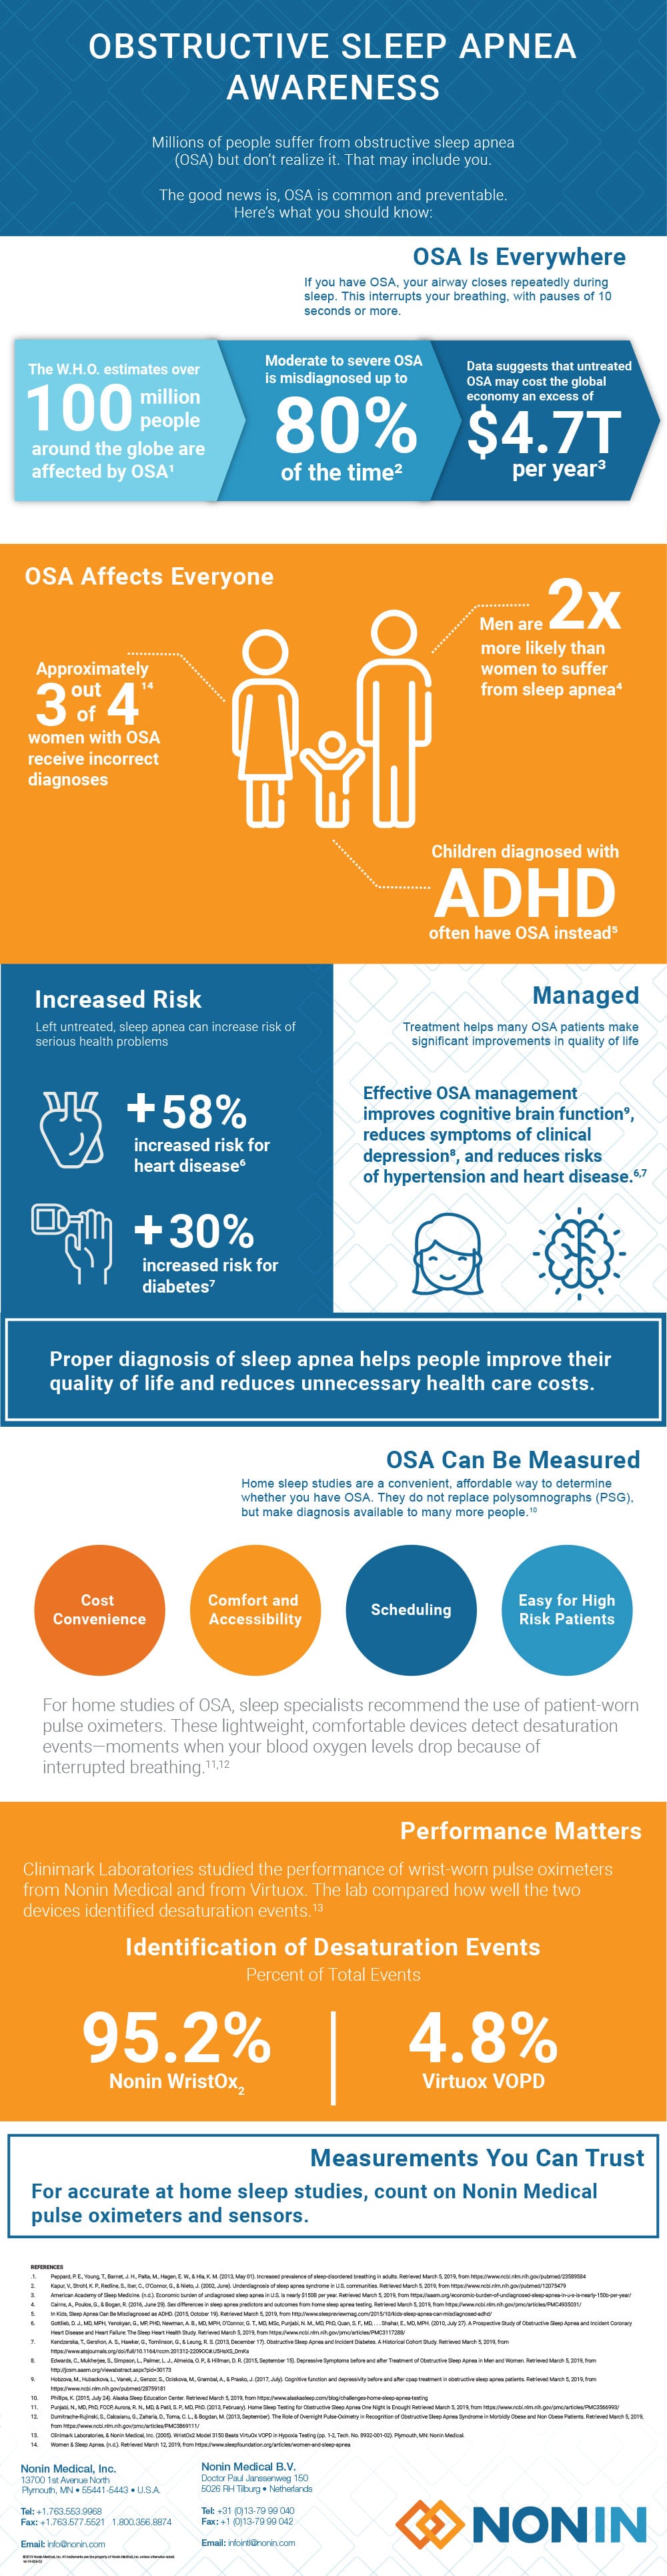 Obstructive Sleep Apnea, awareness, airway closes during sleep, OSA, affects everyone, ADHD, increased risk, health problems, proper diagnosis, improve quality of life, reduces unnecessary health care costs